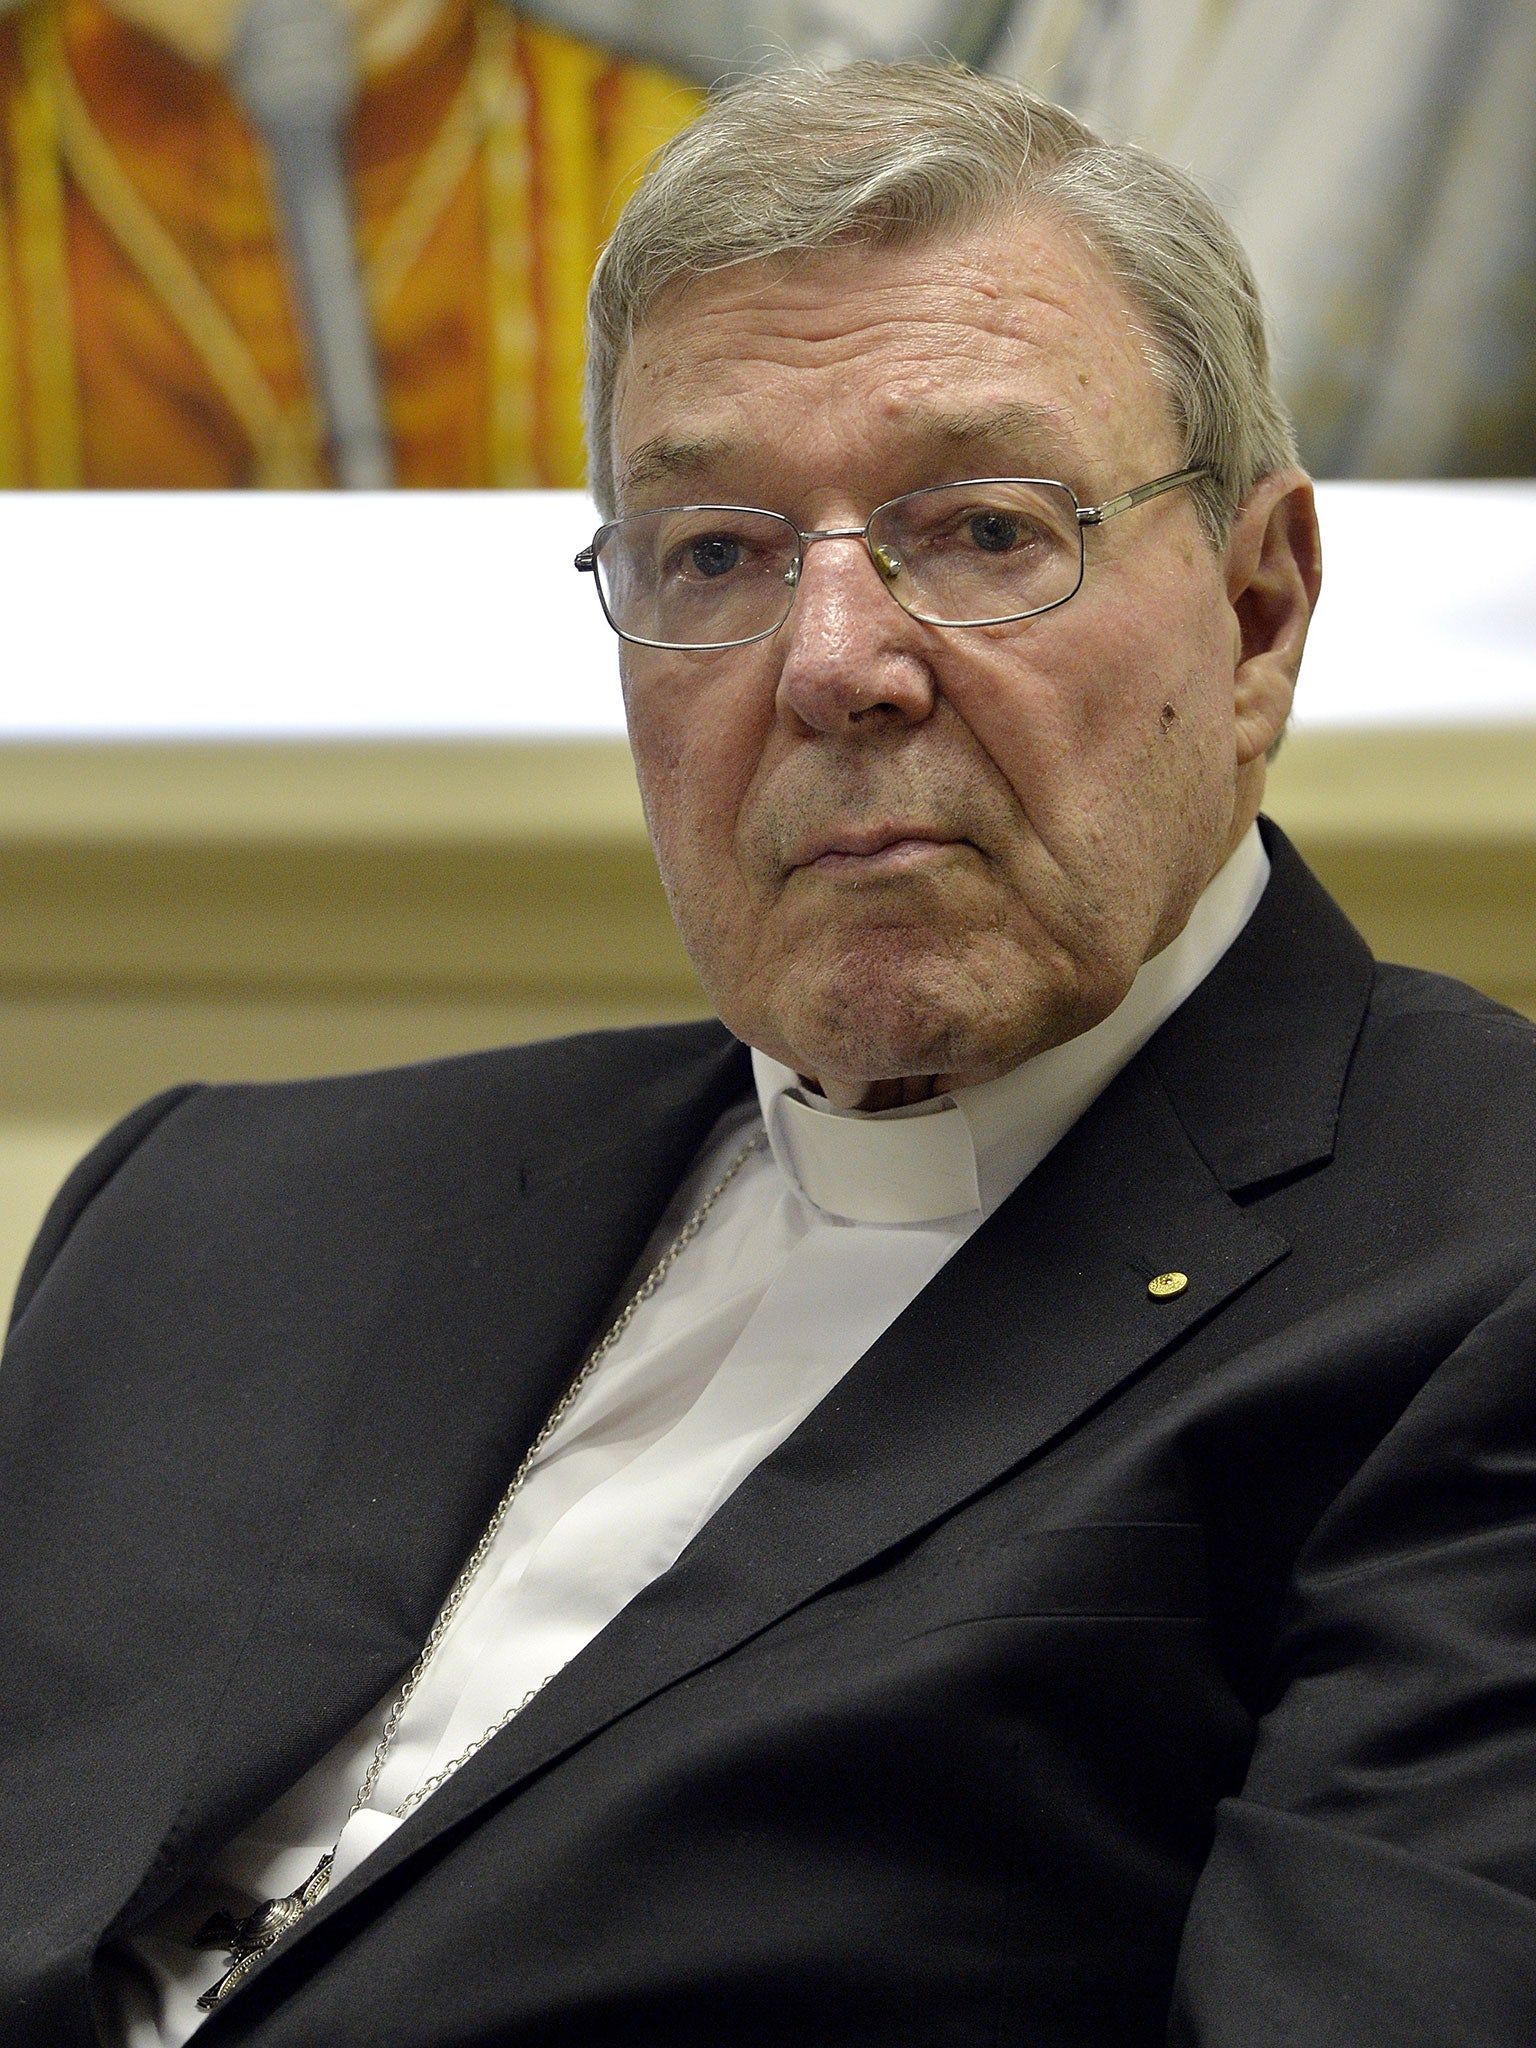 Cardinal Pell, pictured, said Mr Saunders’ claims were 'false and offensive', and announced he was consulting lawyers